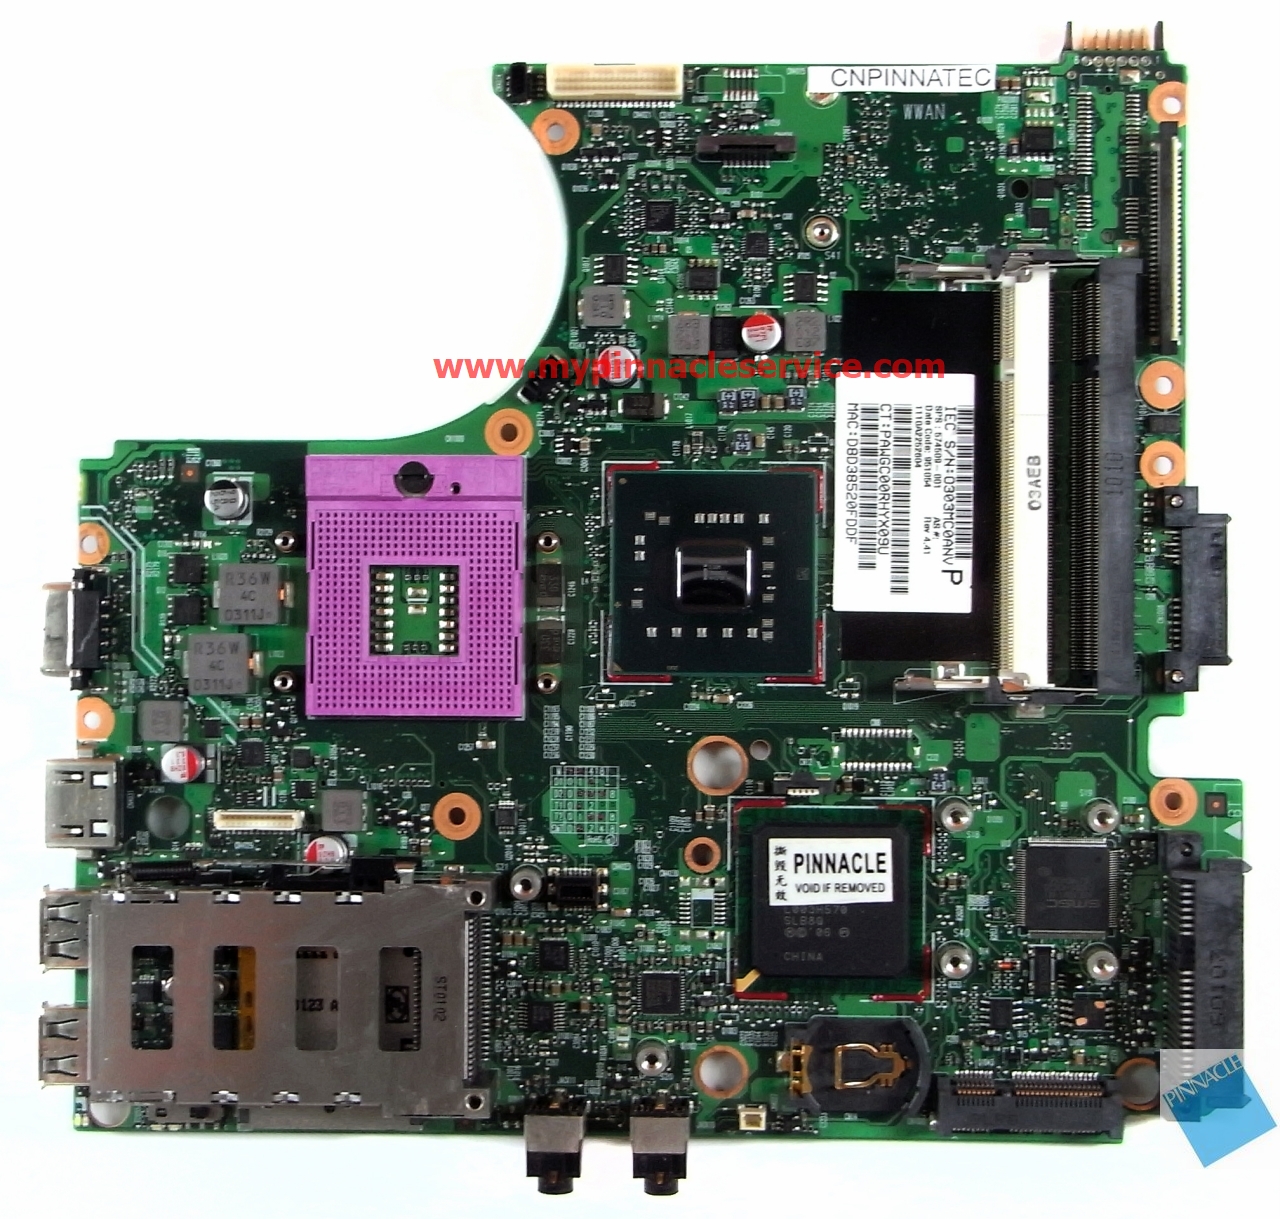 574509-001-motherboard-for-hp-compaq-4510s-4311s-4411s-4410s-6050a2252601-rimg0004.jpg